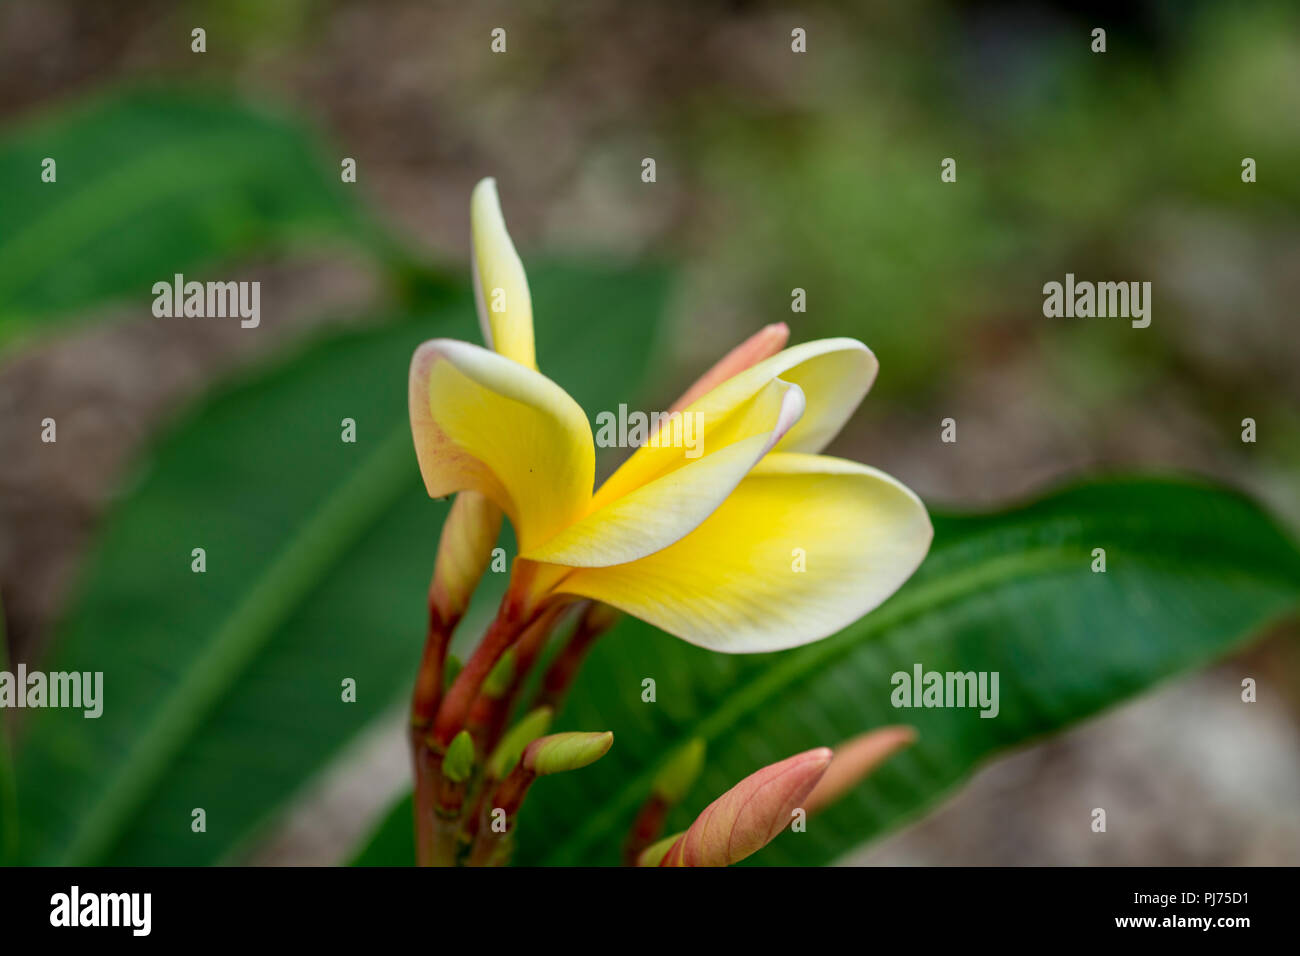 colorful flowering plants Stock Photo